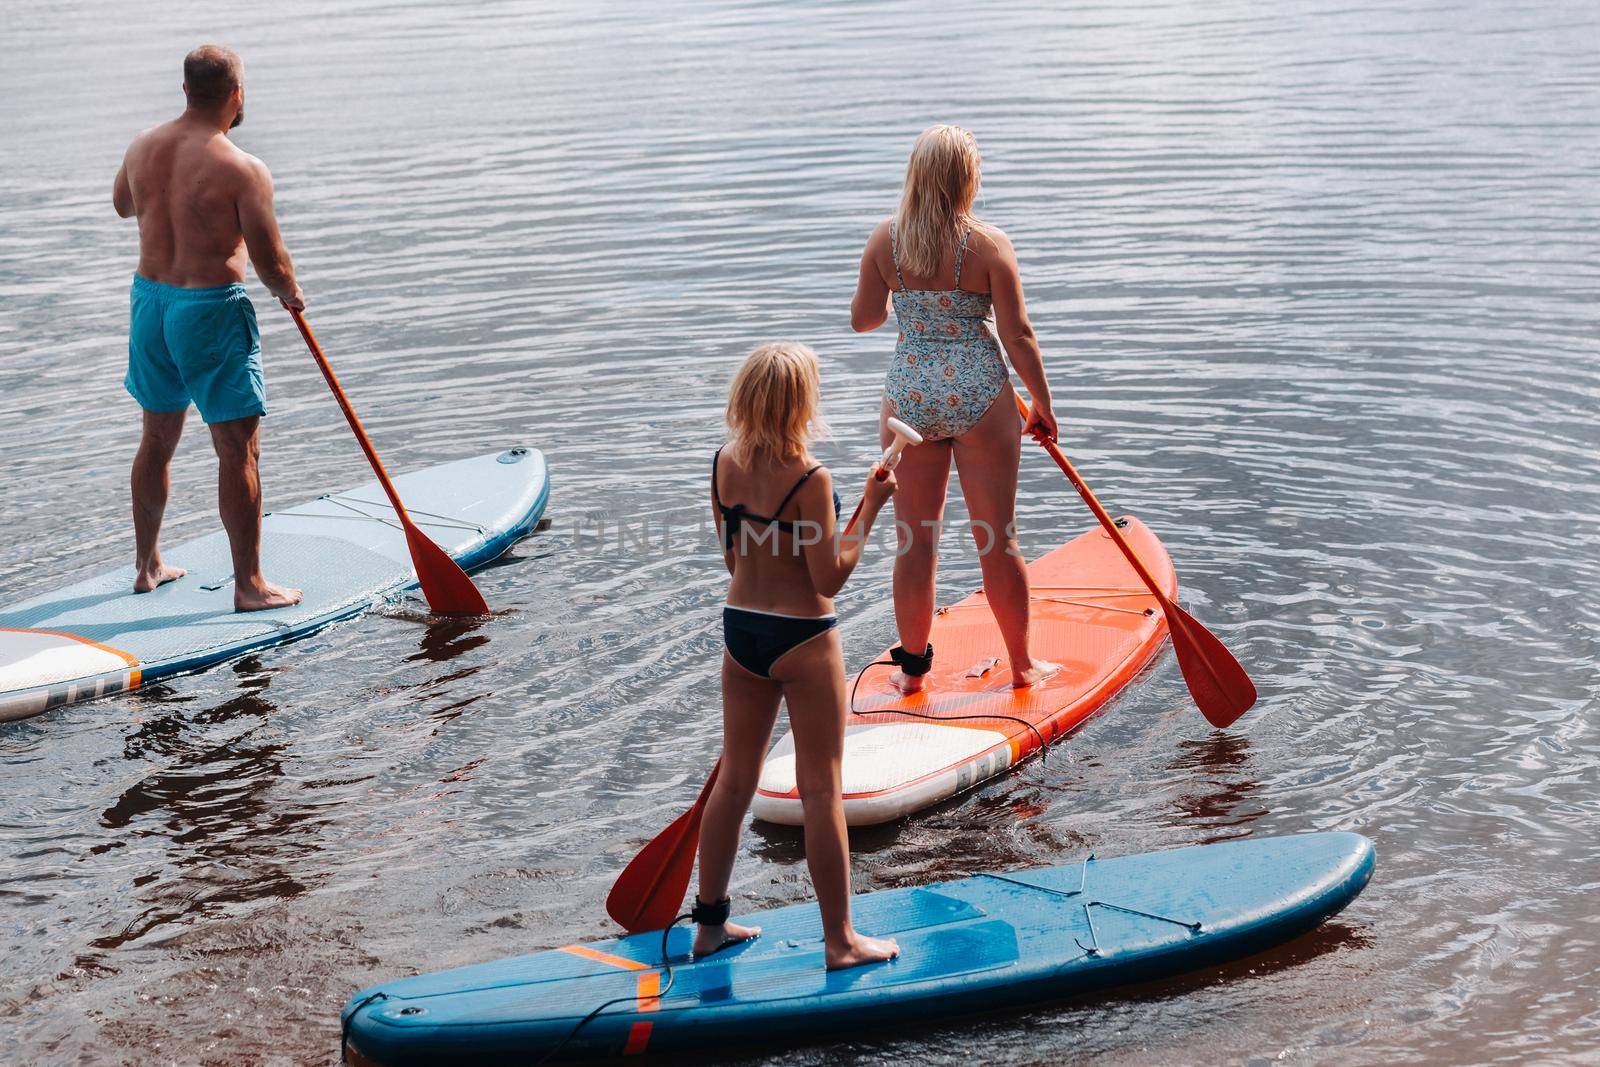 The family spends time together swimming on sup boards on the lake by Lobachad